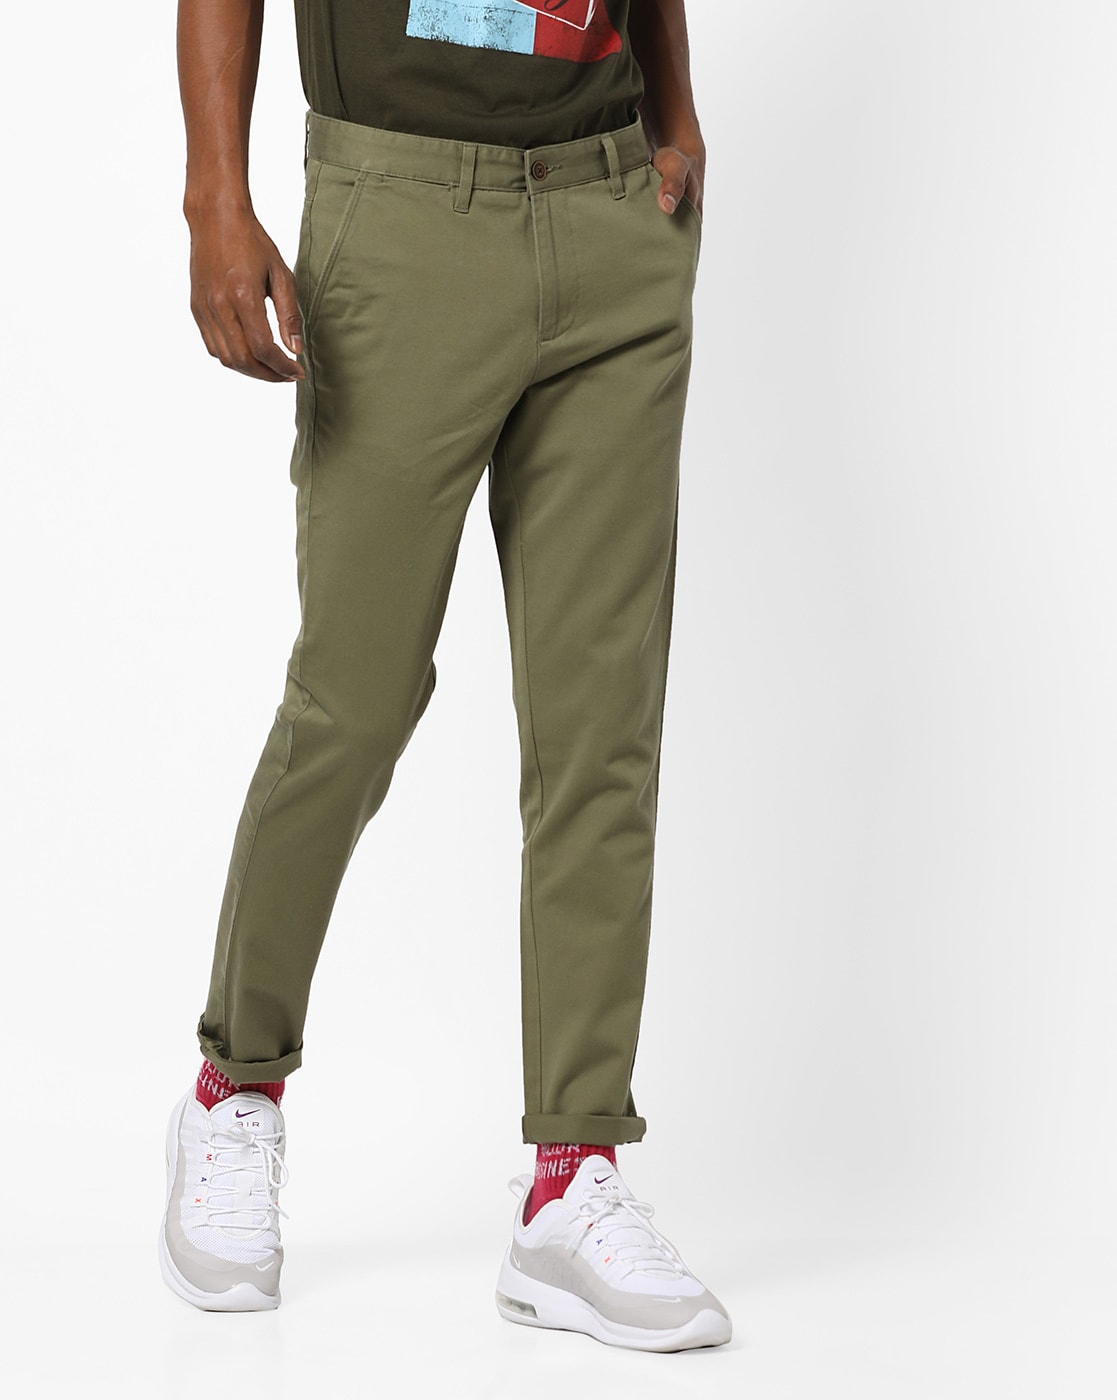 Buy Military Green Trousers  Pants for Men by AJIO Online  Ajiocom